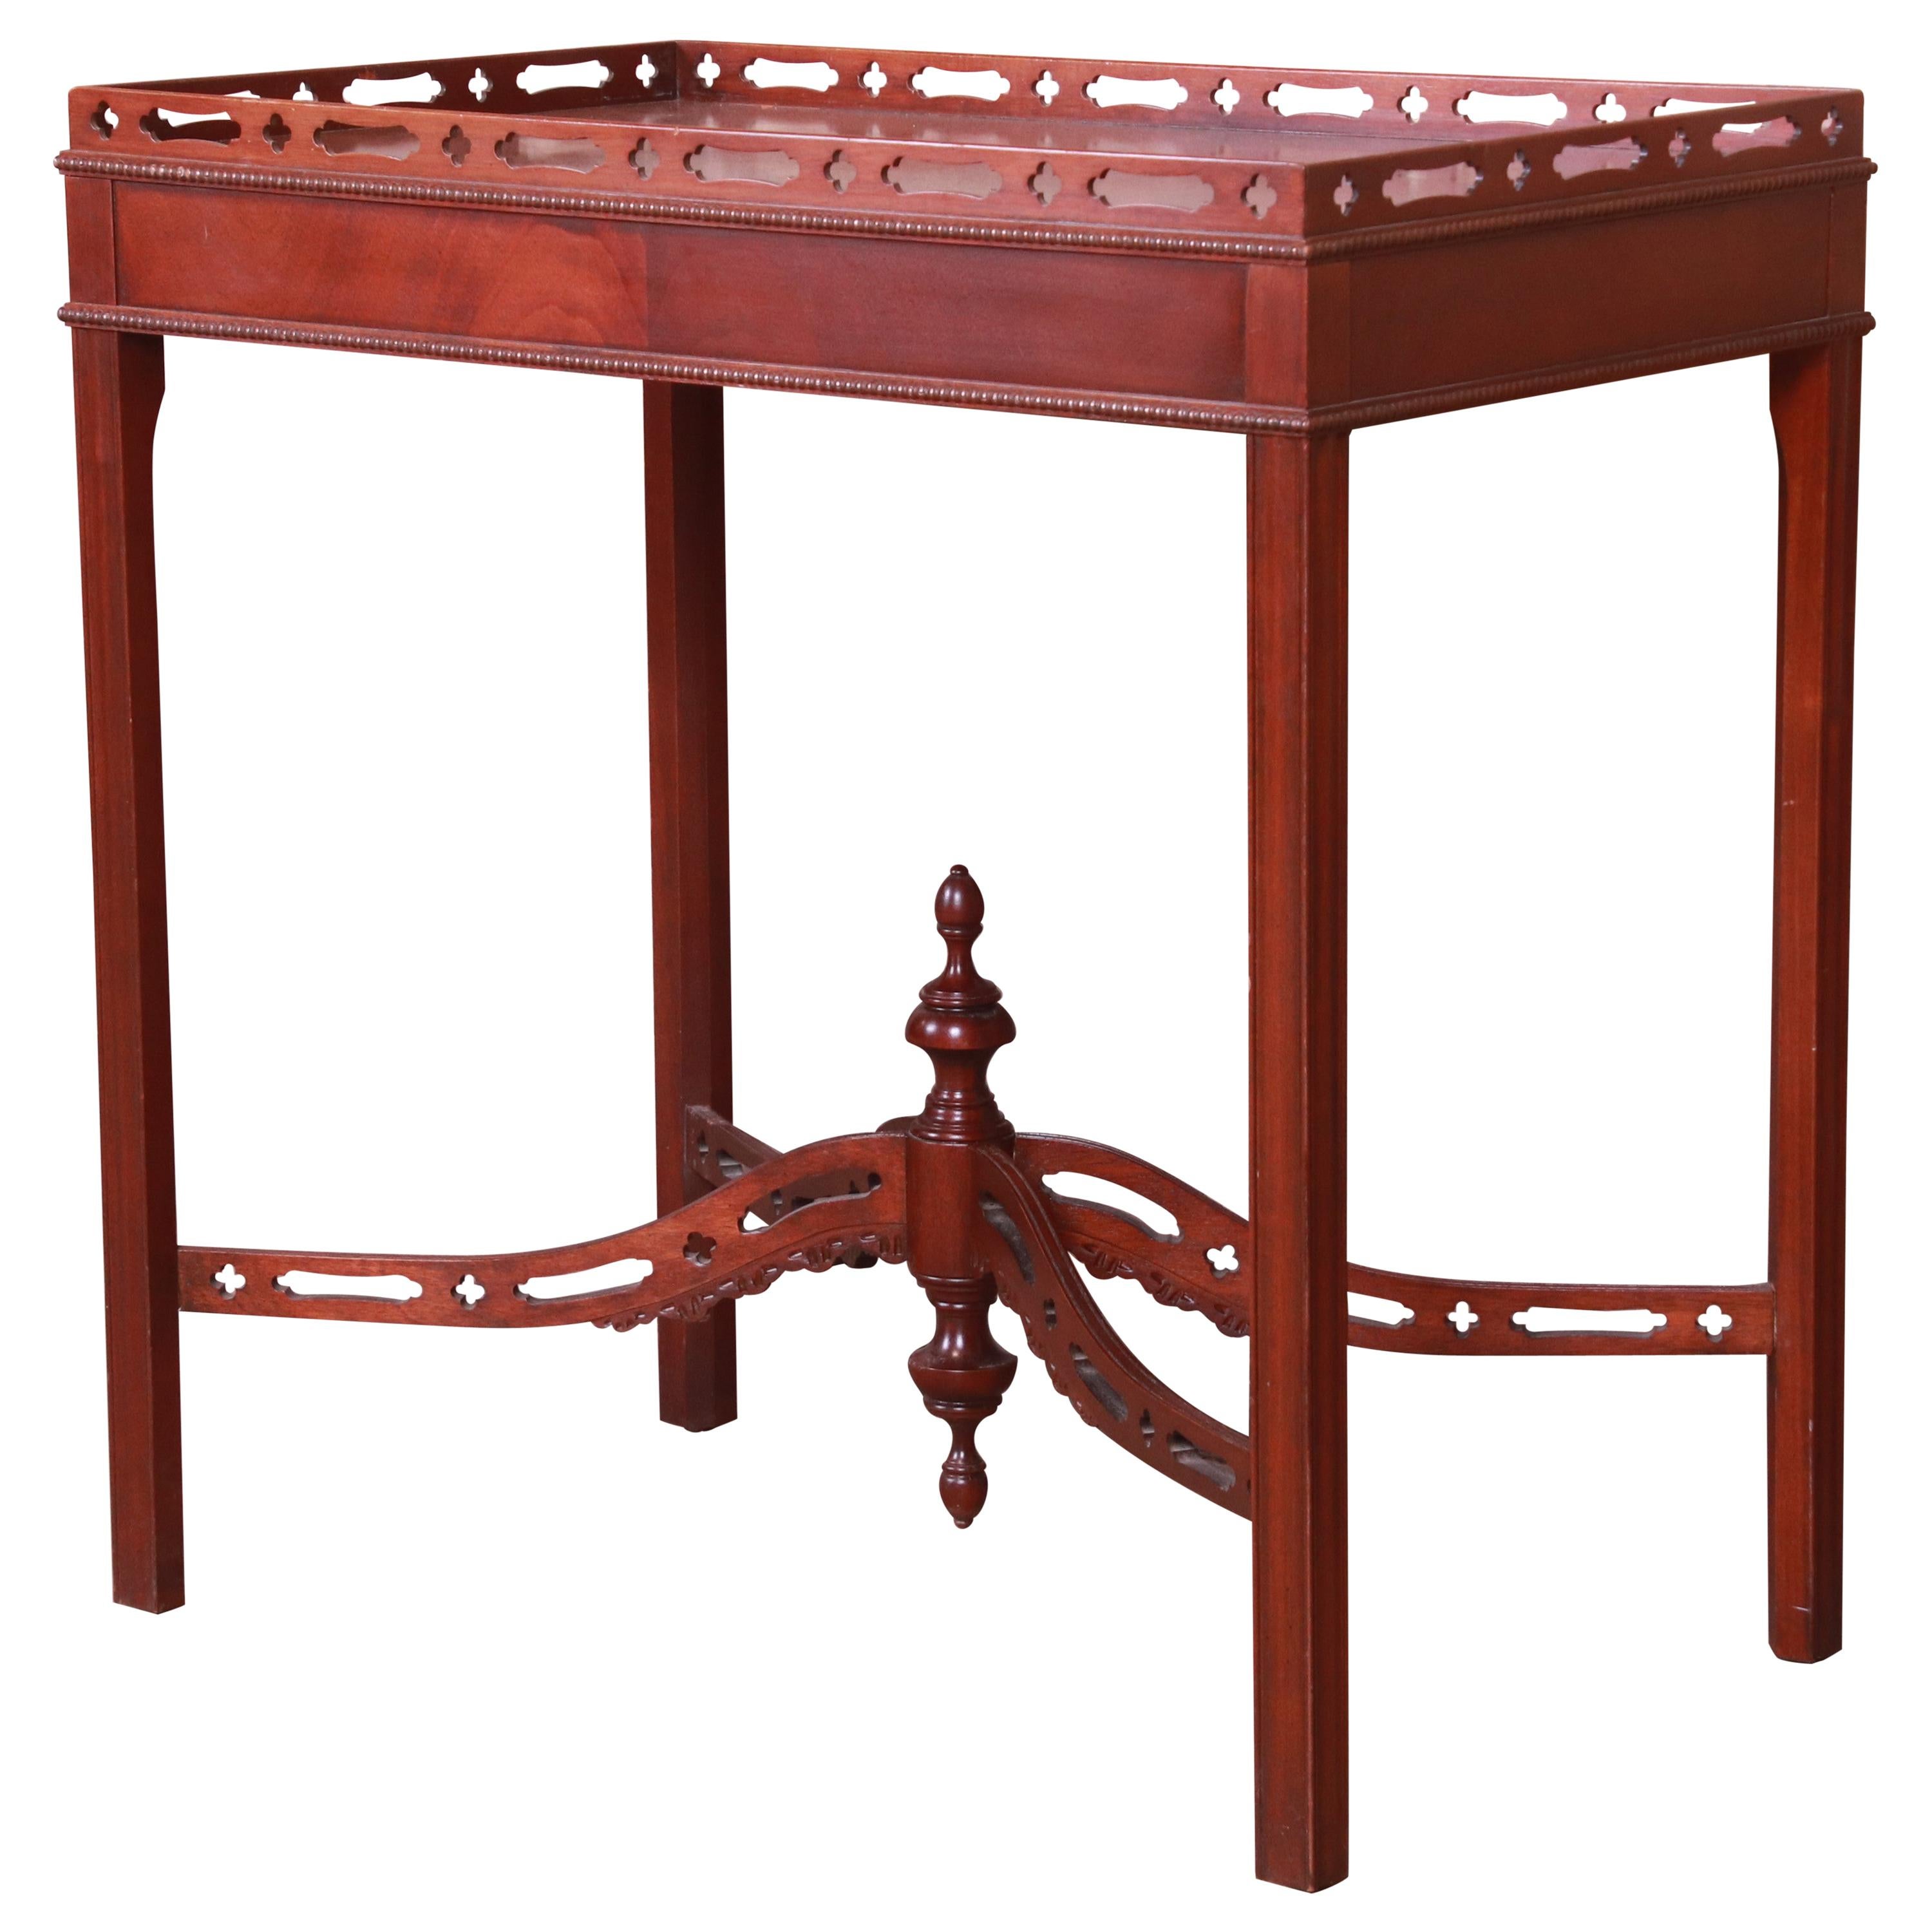 Baker Furniture Chippendale Carved Mahogany Tea Table